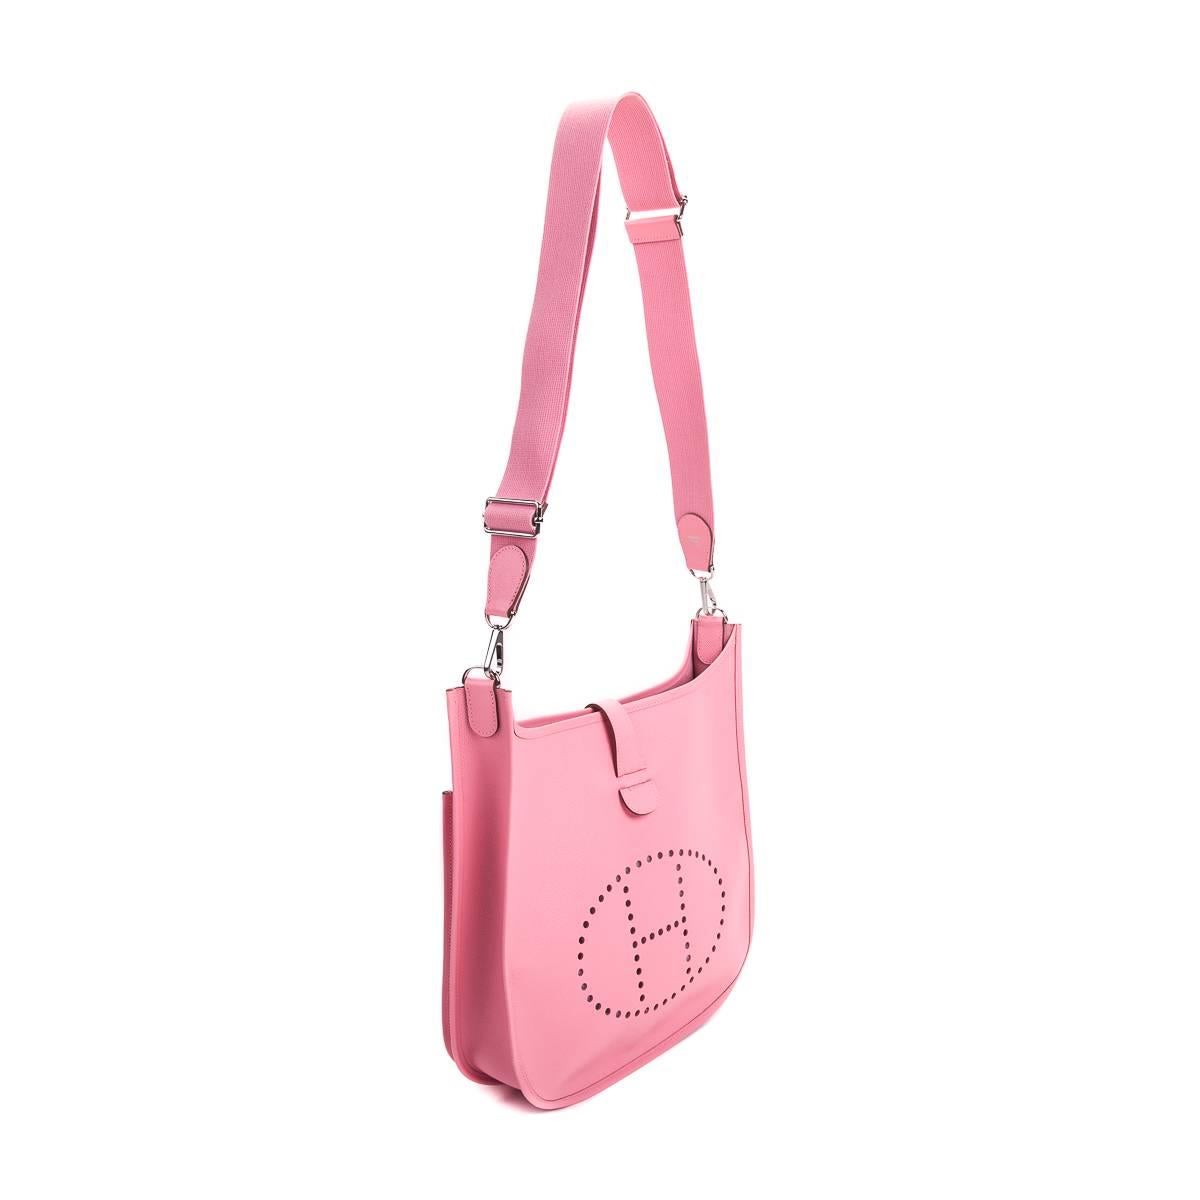 Hermes Pink Evelyne PM Shoulder Bag Epsom leather Rose Confetti   In New Condition For Sale In Toronto, Ontario